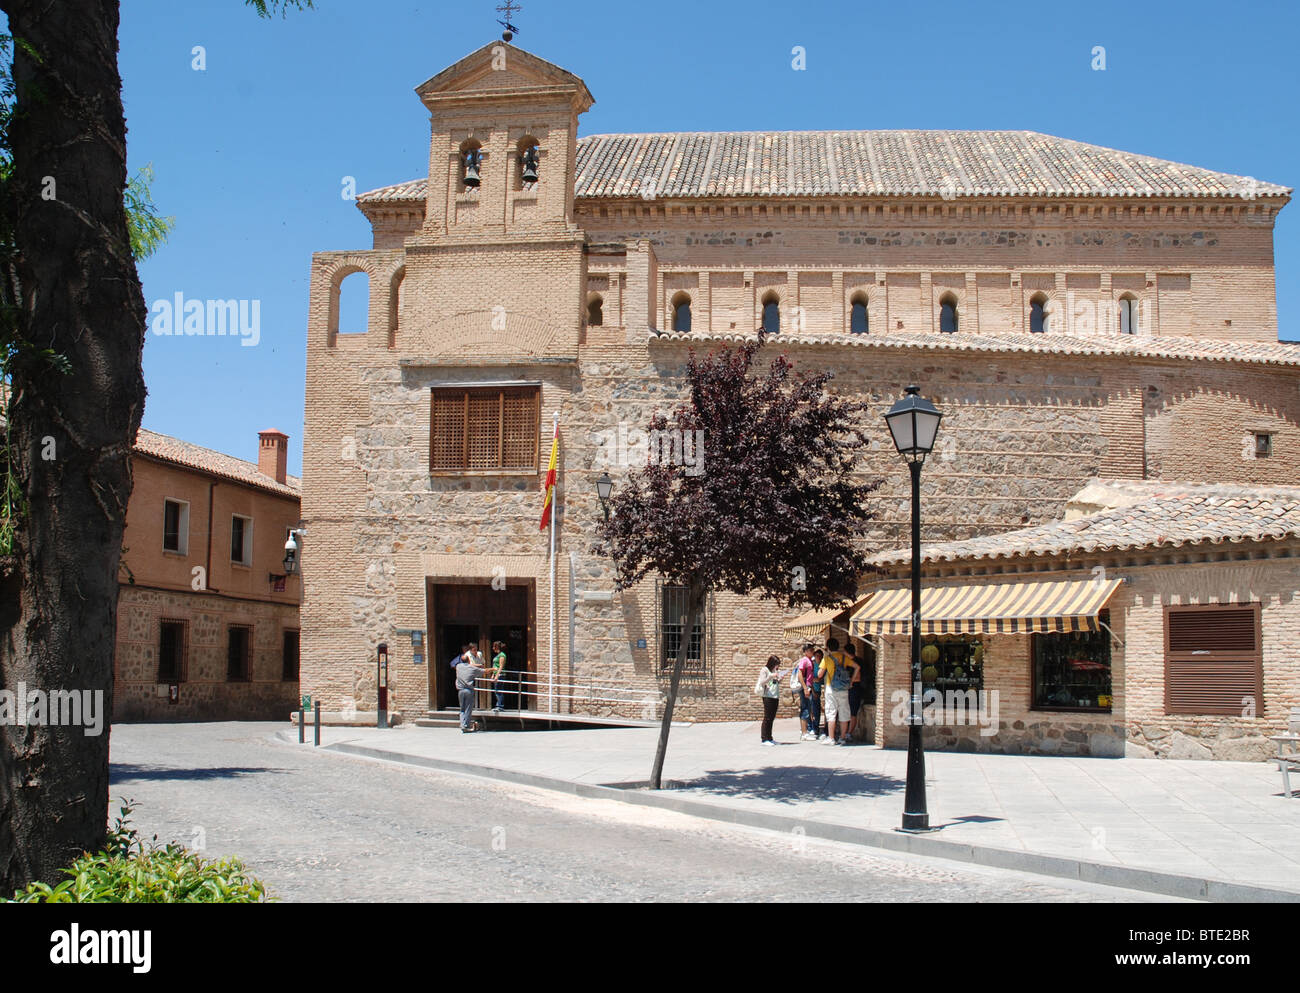 5408. The El Transito Synagogue in Toledo, Spain. Built by Samuel Ben Meir Ha-Levi Abulafia  in c.1320-1360. The synagogue is lo Stock Photo